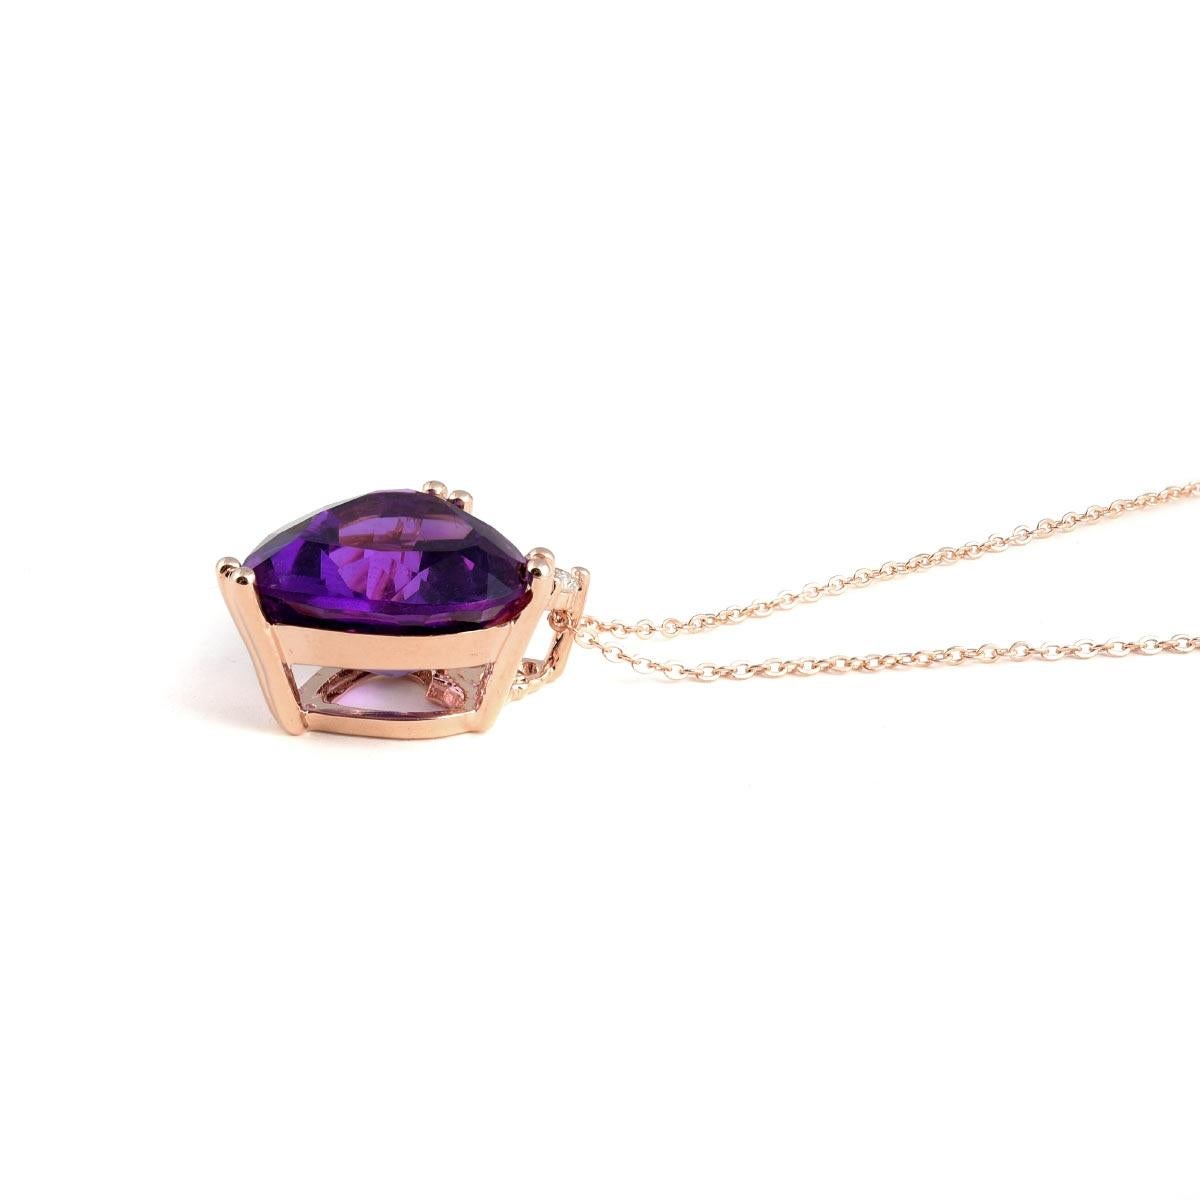 Mixed Cut 2.55 Carats AAA Natural Amethyst Diamonds set in 14K Rose Gold Pendant For Sale